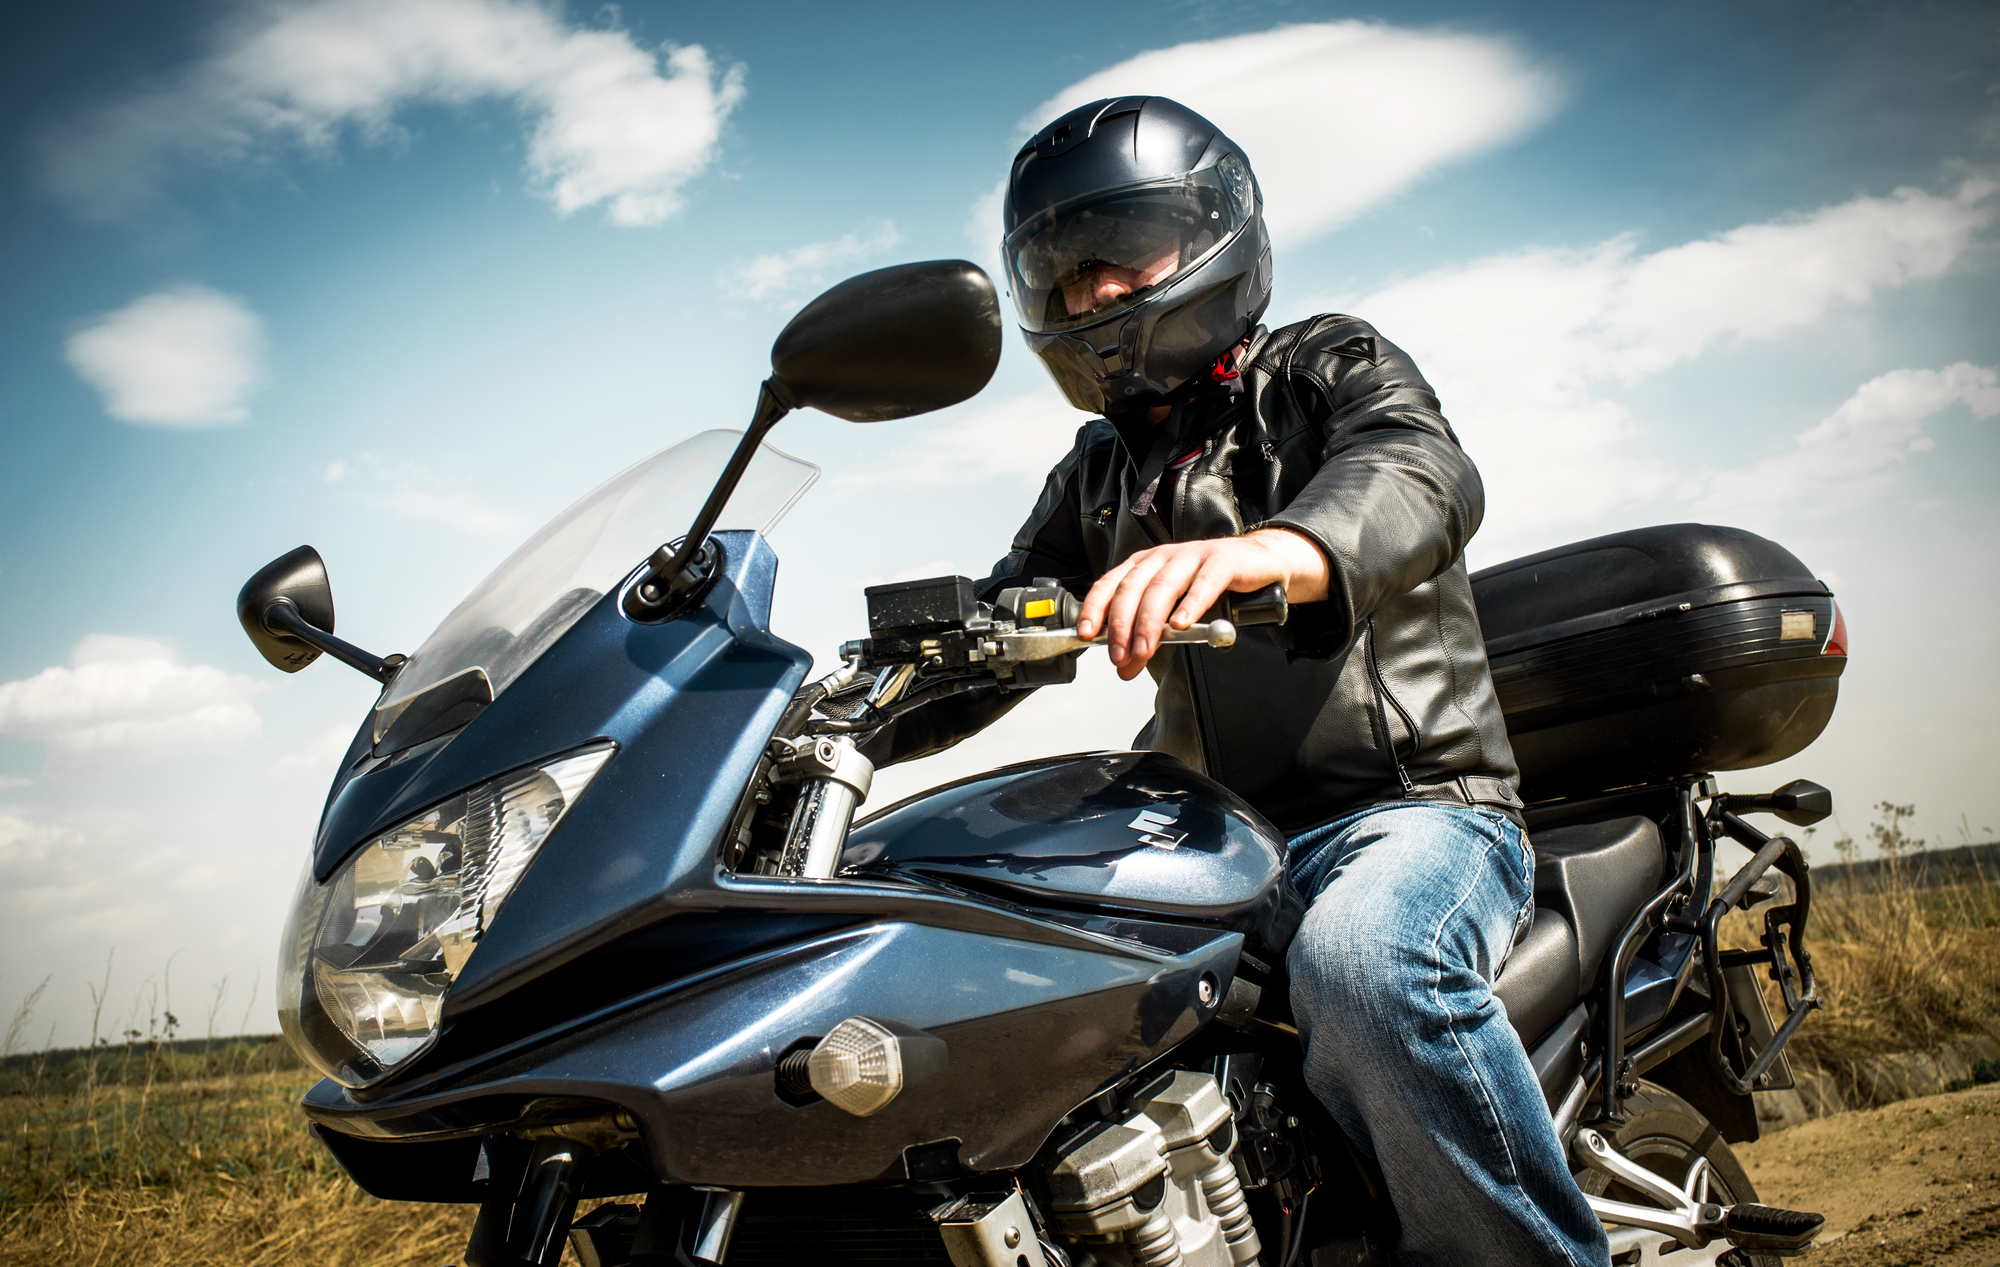 Tampa motorcycle accident attorneys